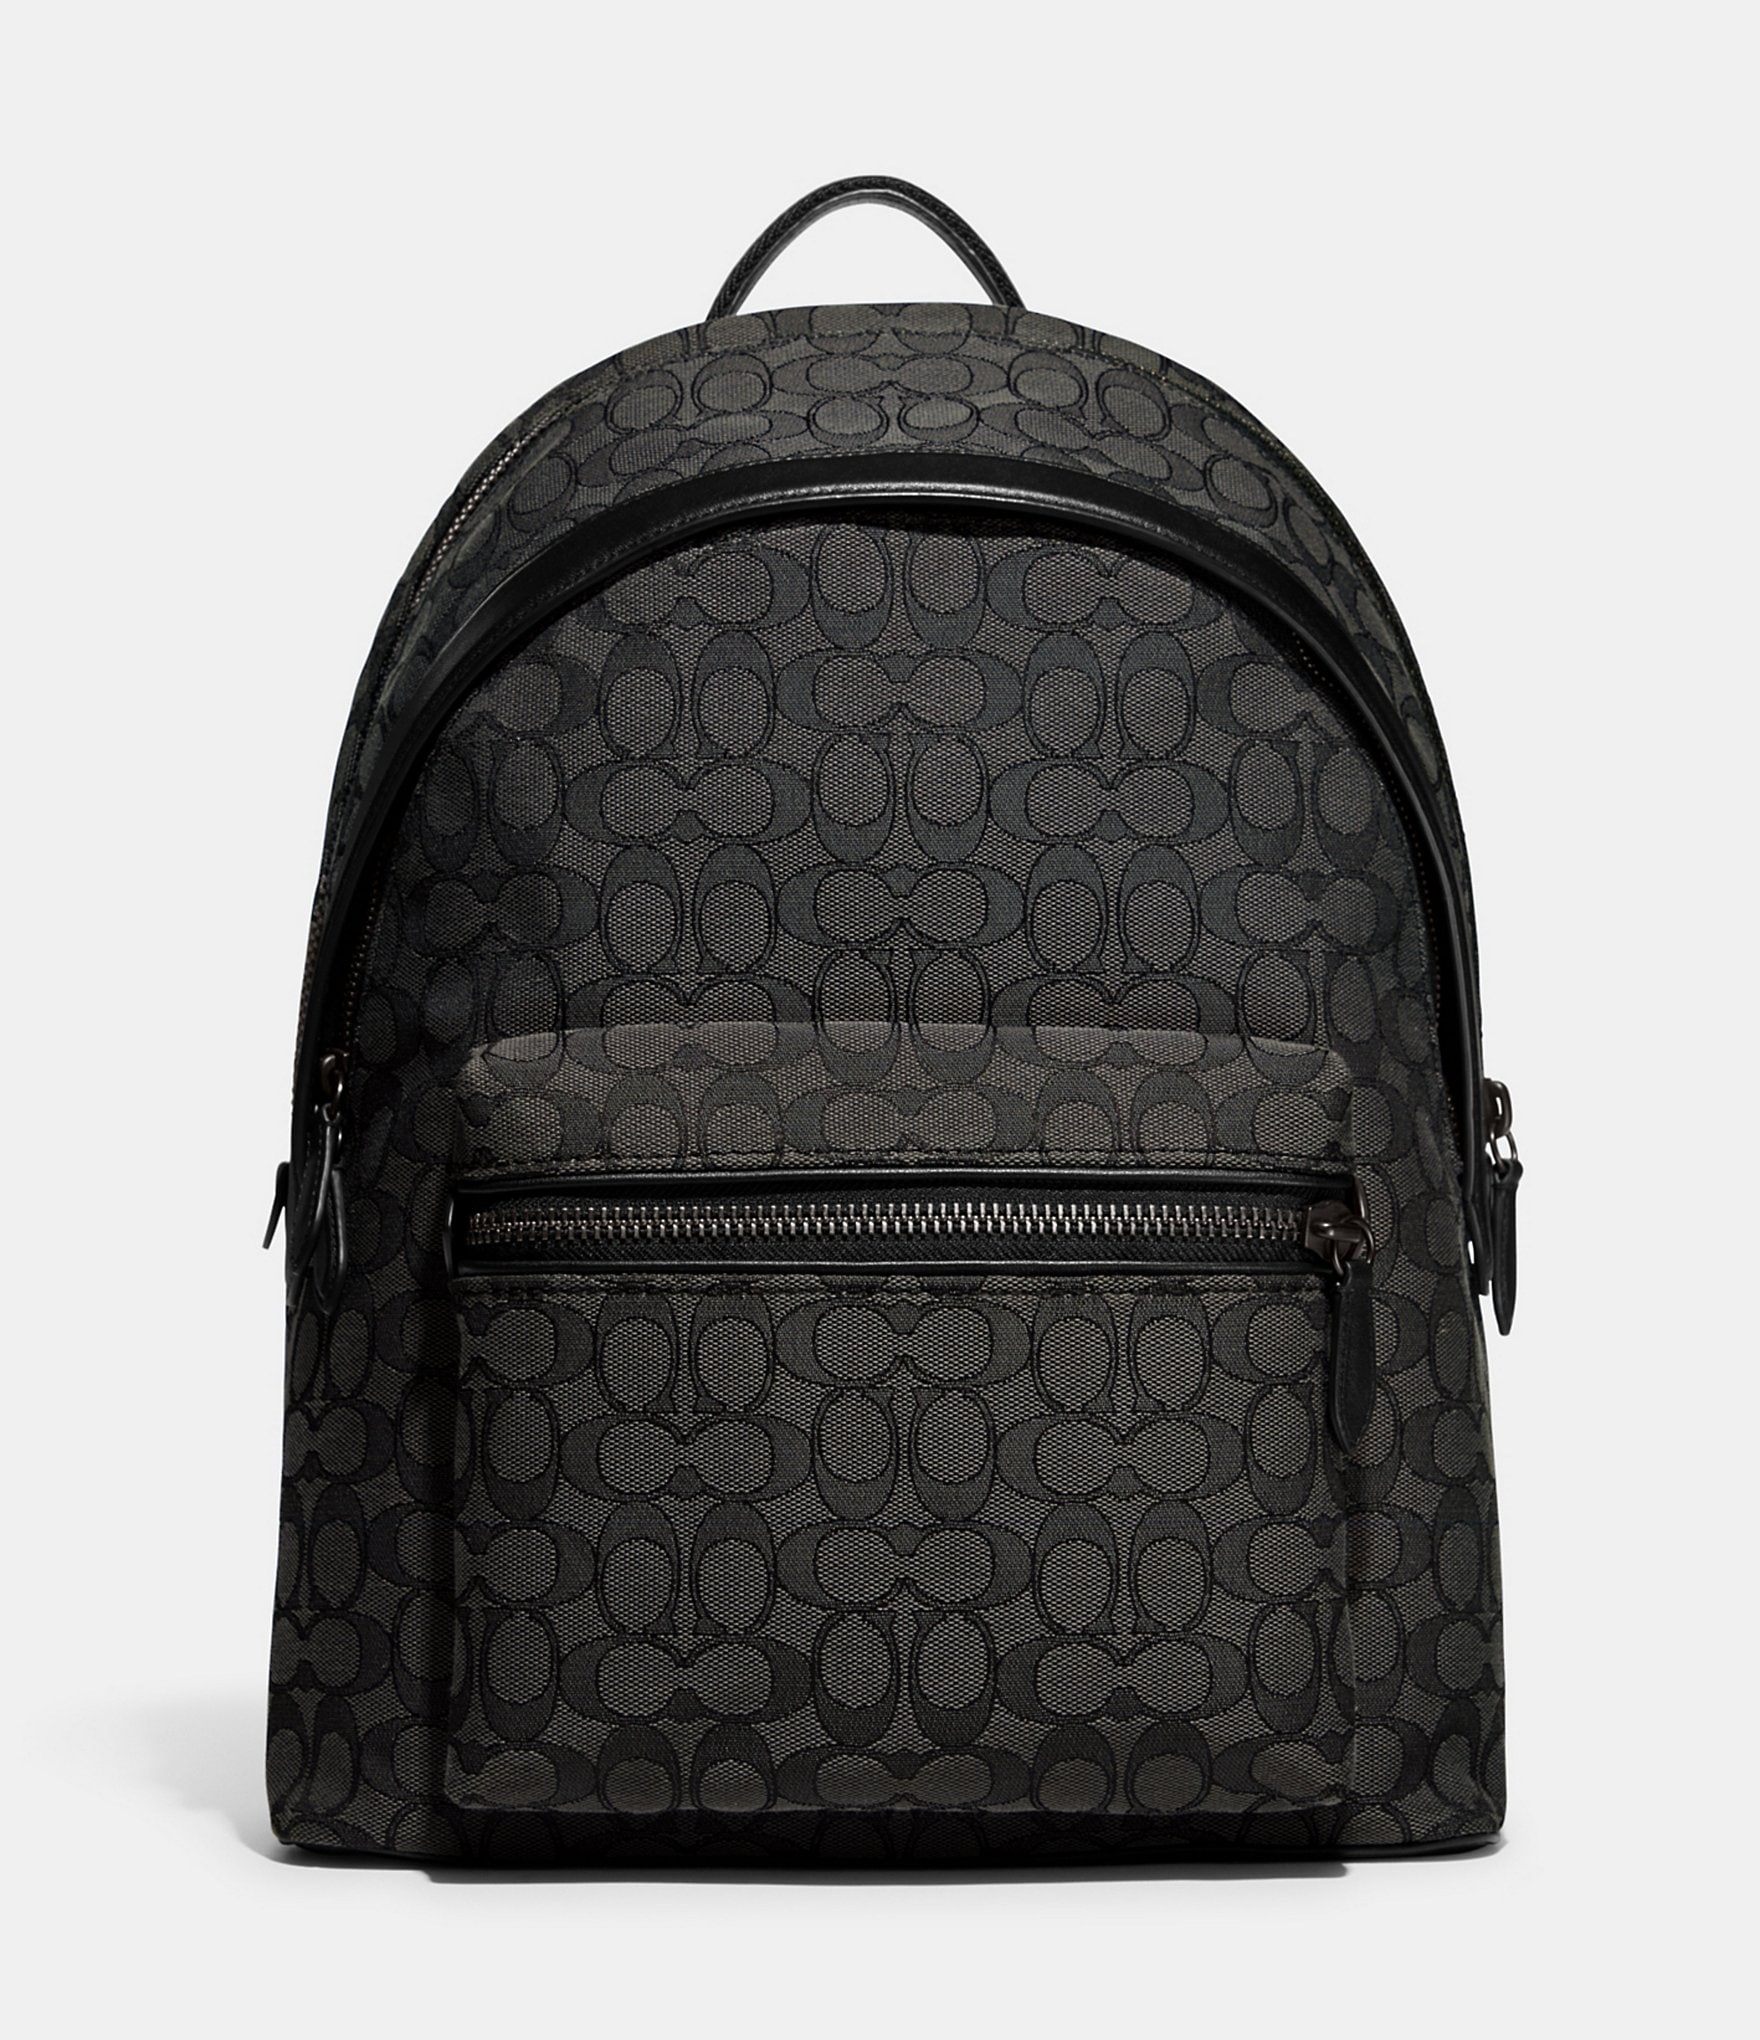 Coach Charter Signature Jacquard Backpack - Charcoal/Black - Size